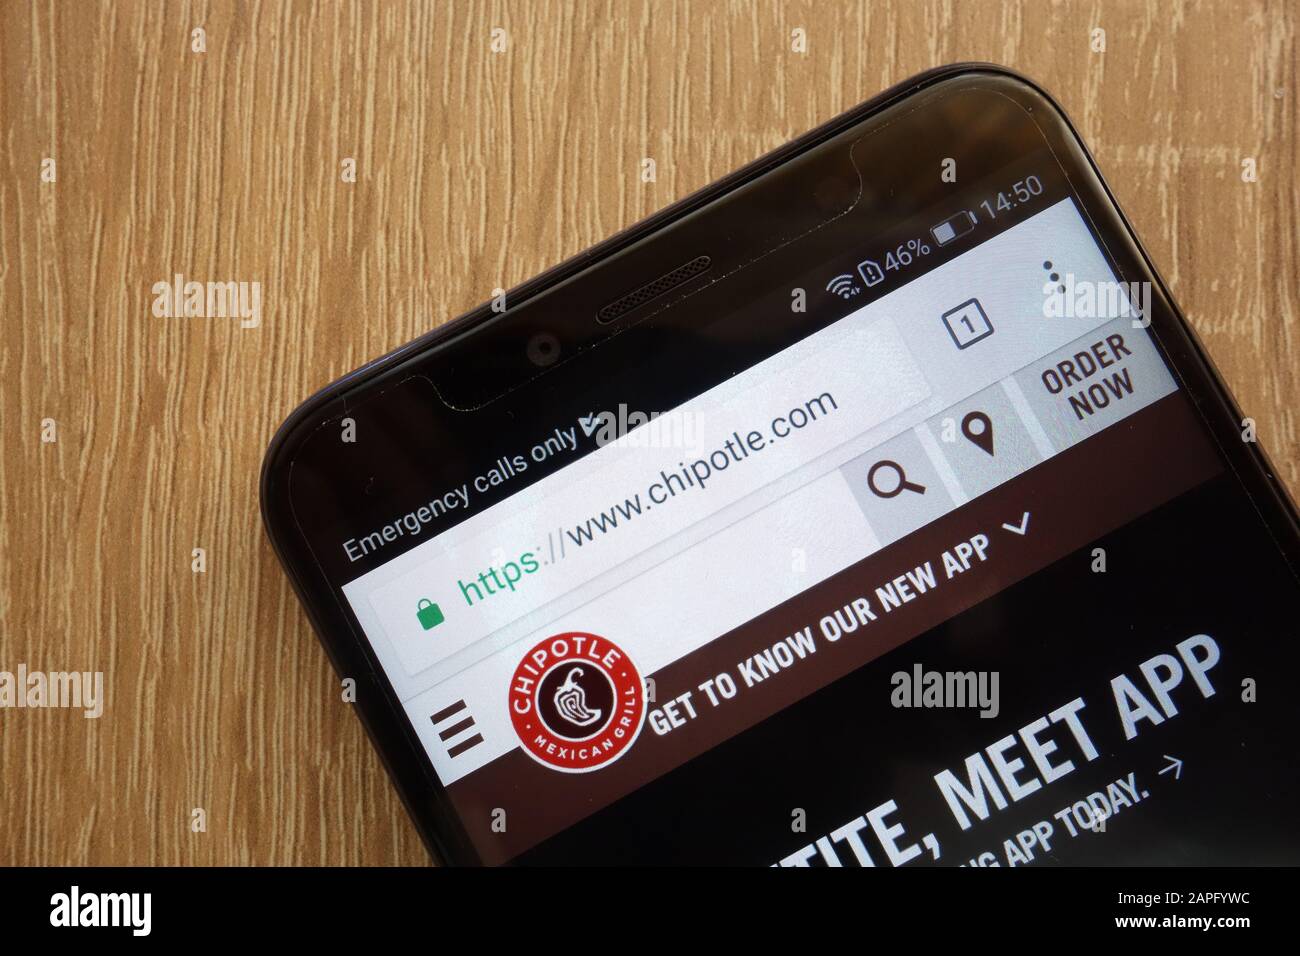 Chipotle website displayed on a modern smartphone Stock Photo